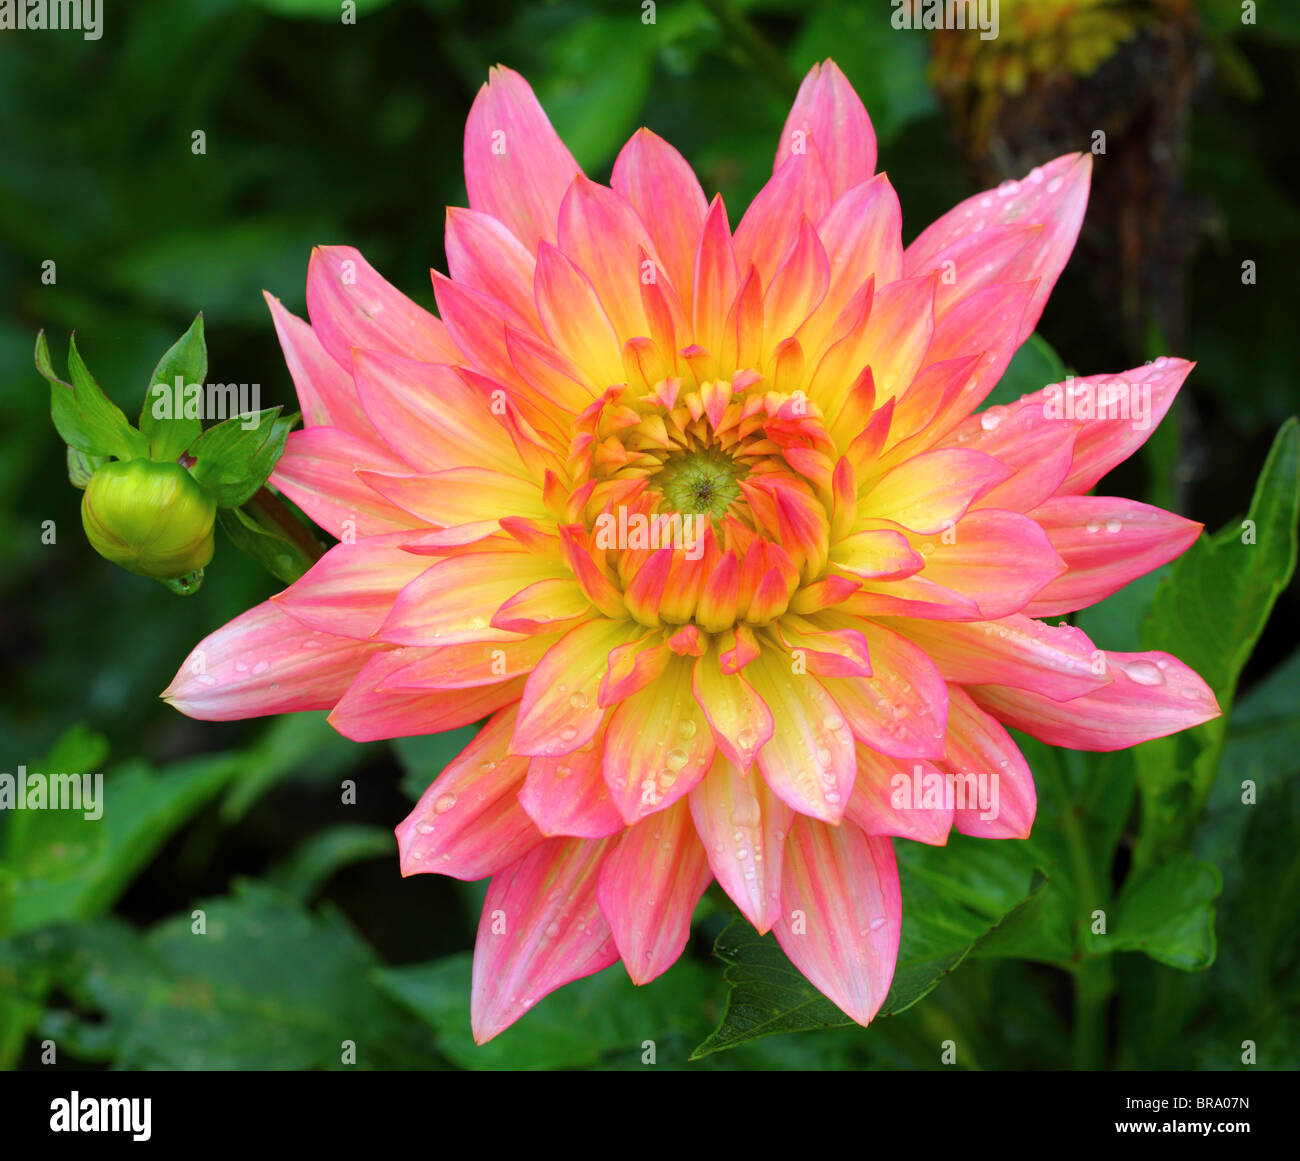 Pink and yellow dahlia flower close up Stock Photo